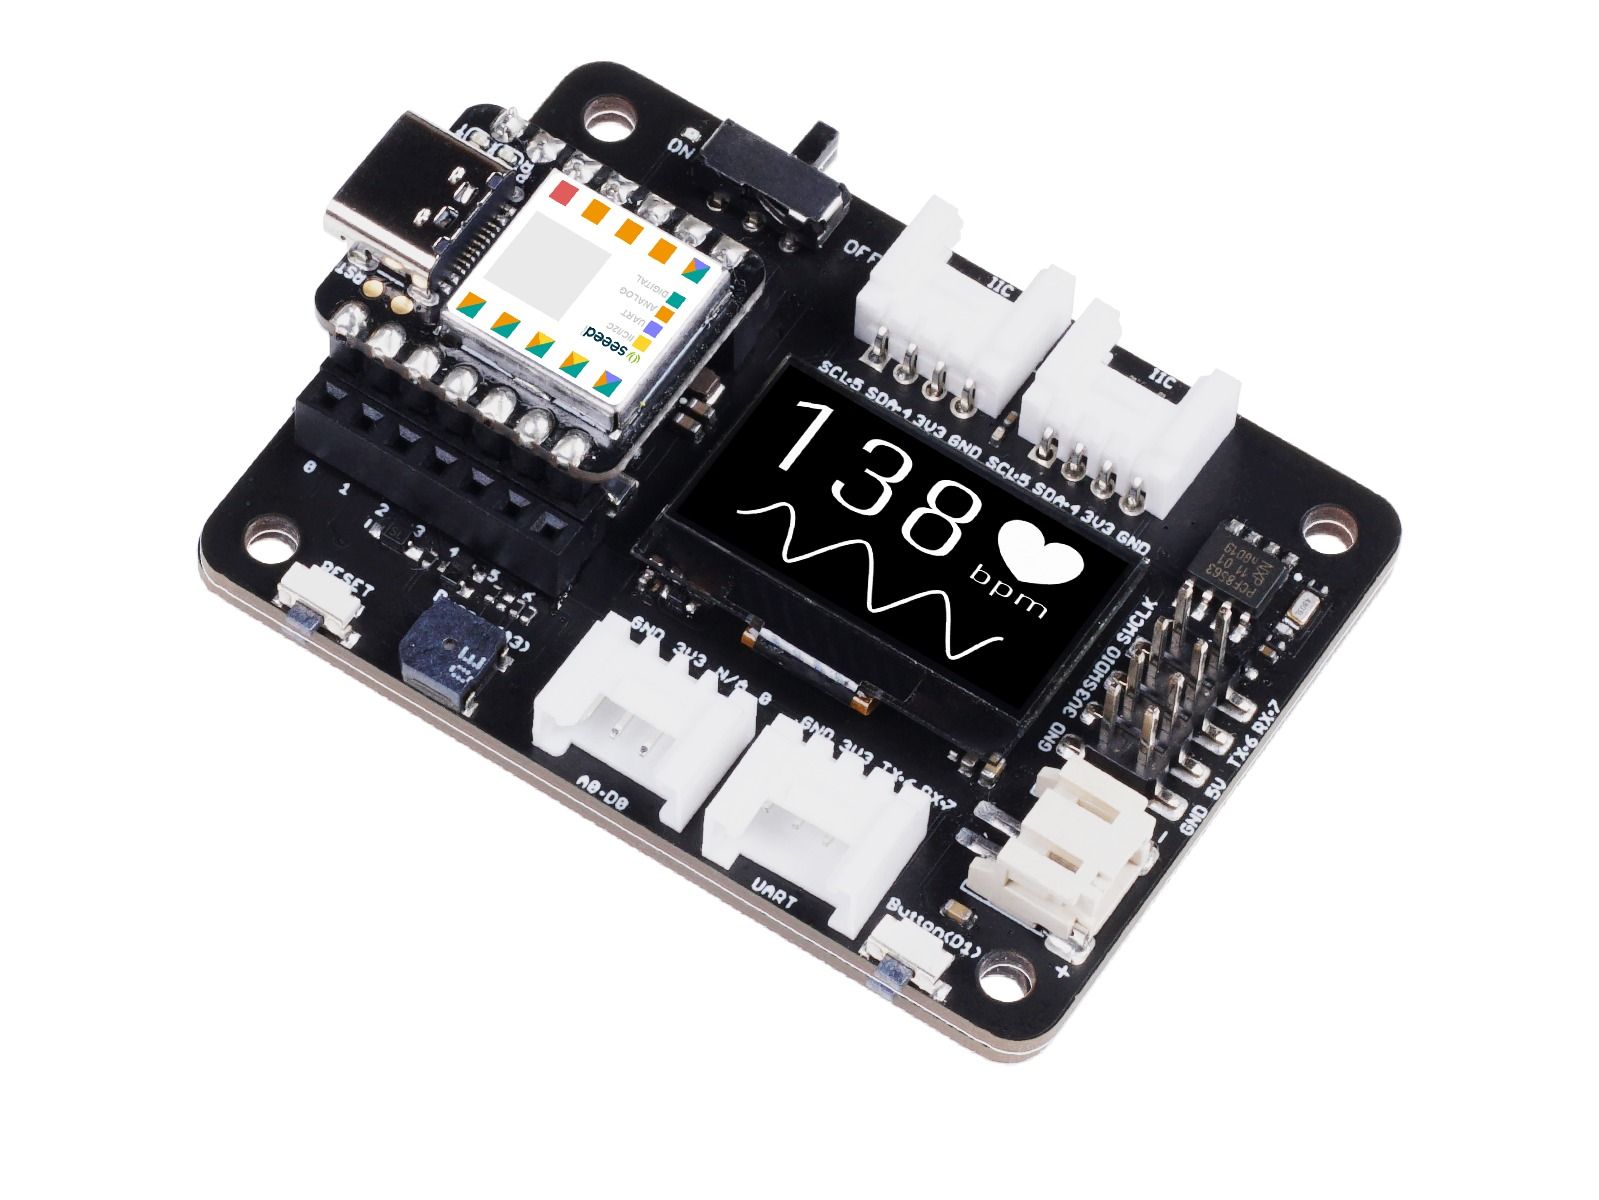 Tiny Arduino-compatible XIAO board from Seeed Studio Gets a Powerful Expansion Board